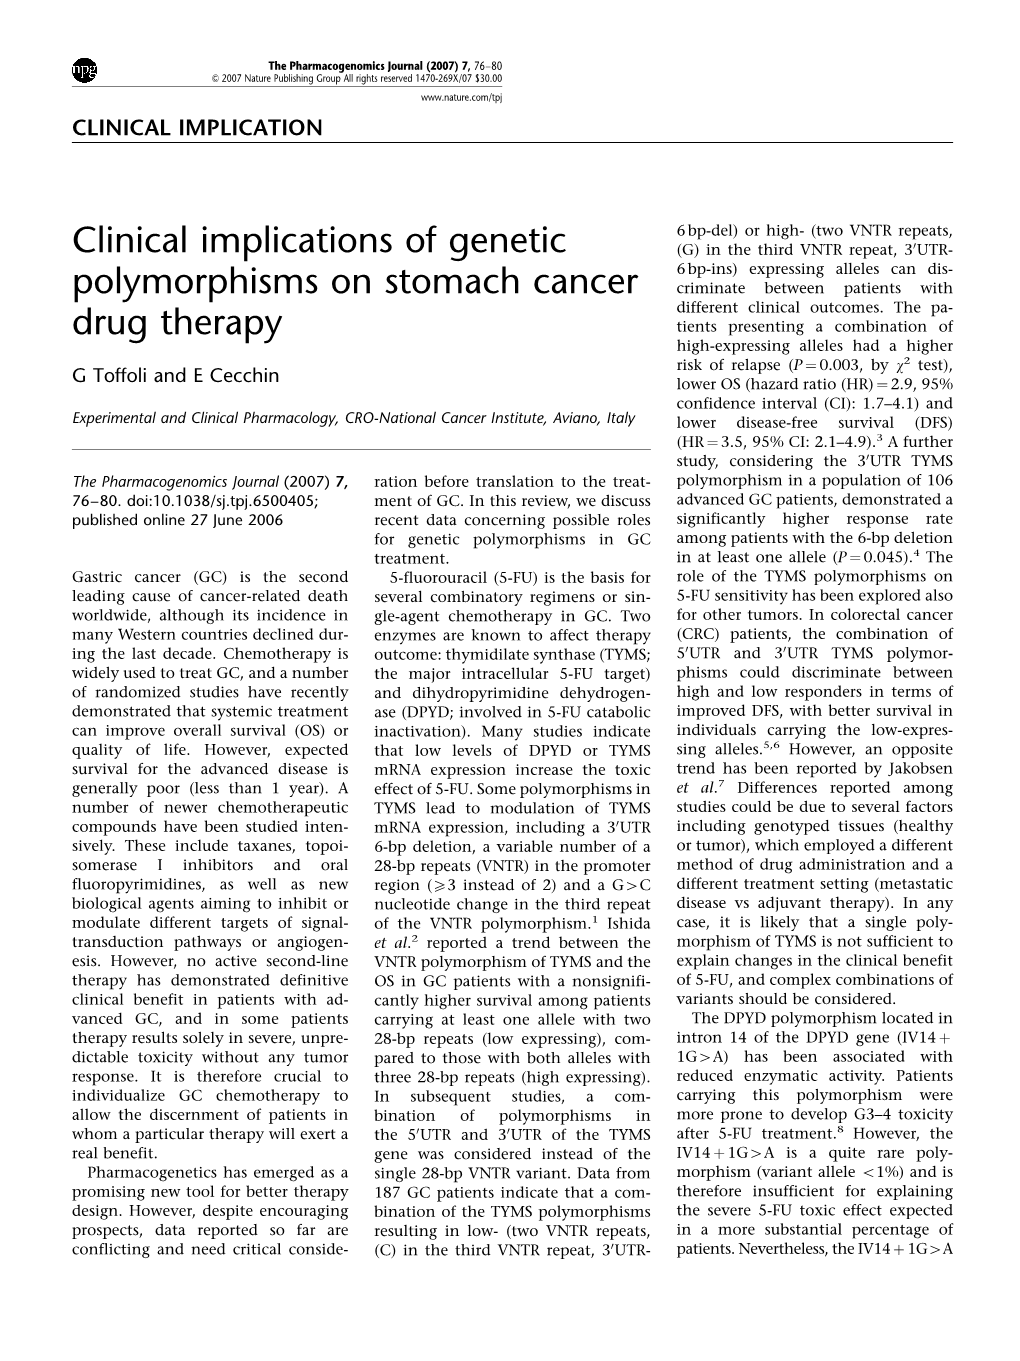 Clinical Implications of Genetic Polymorphisms on Stomach Cancer